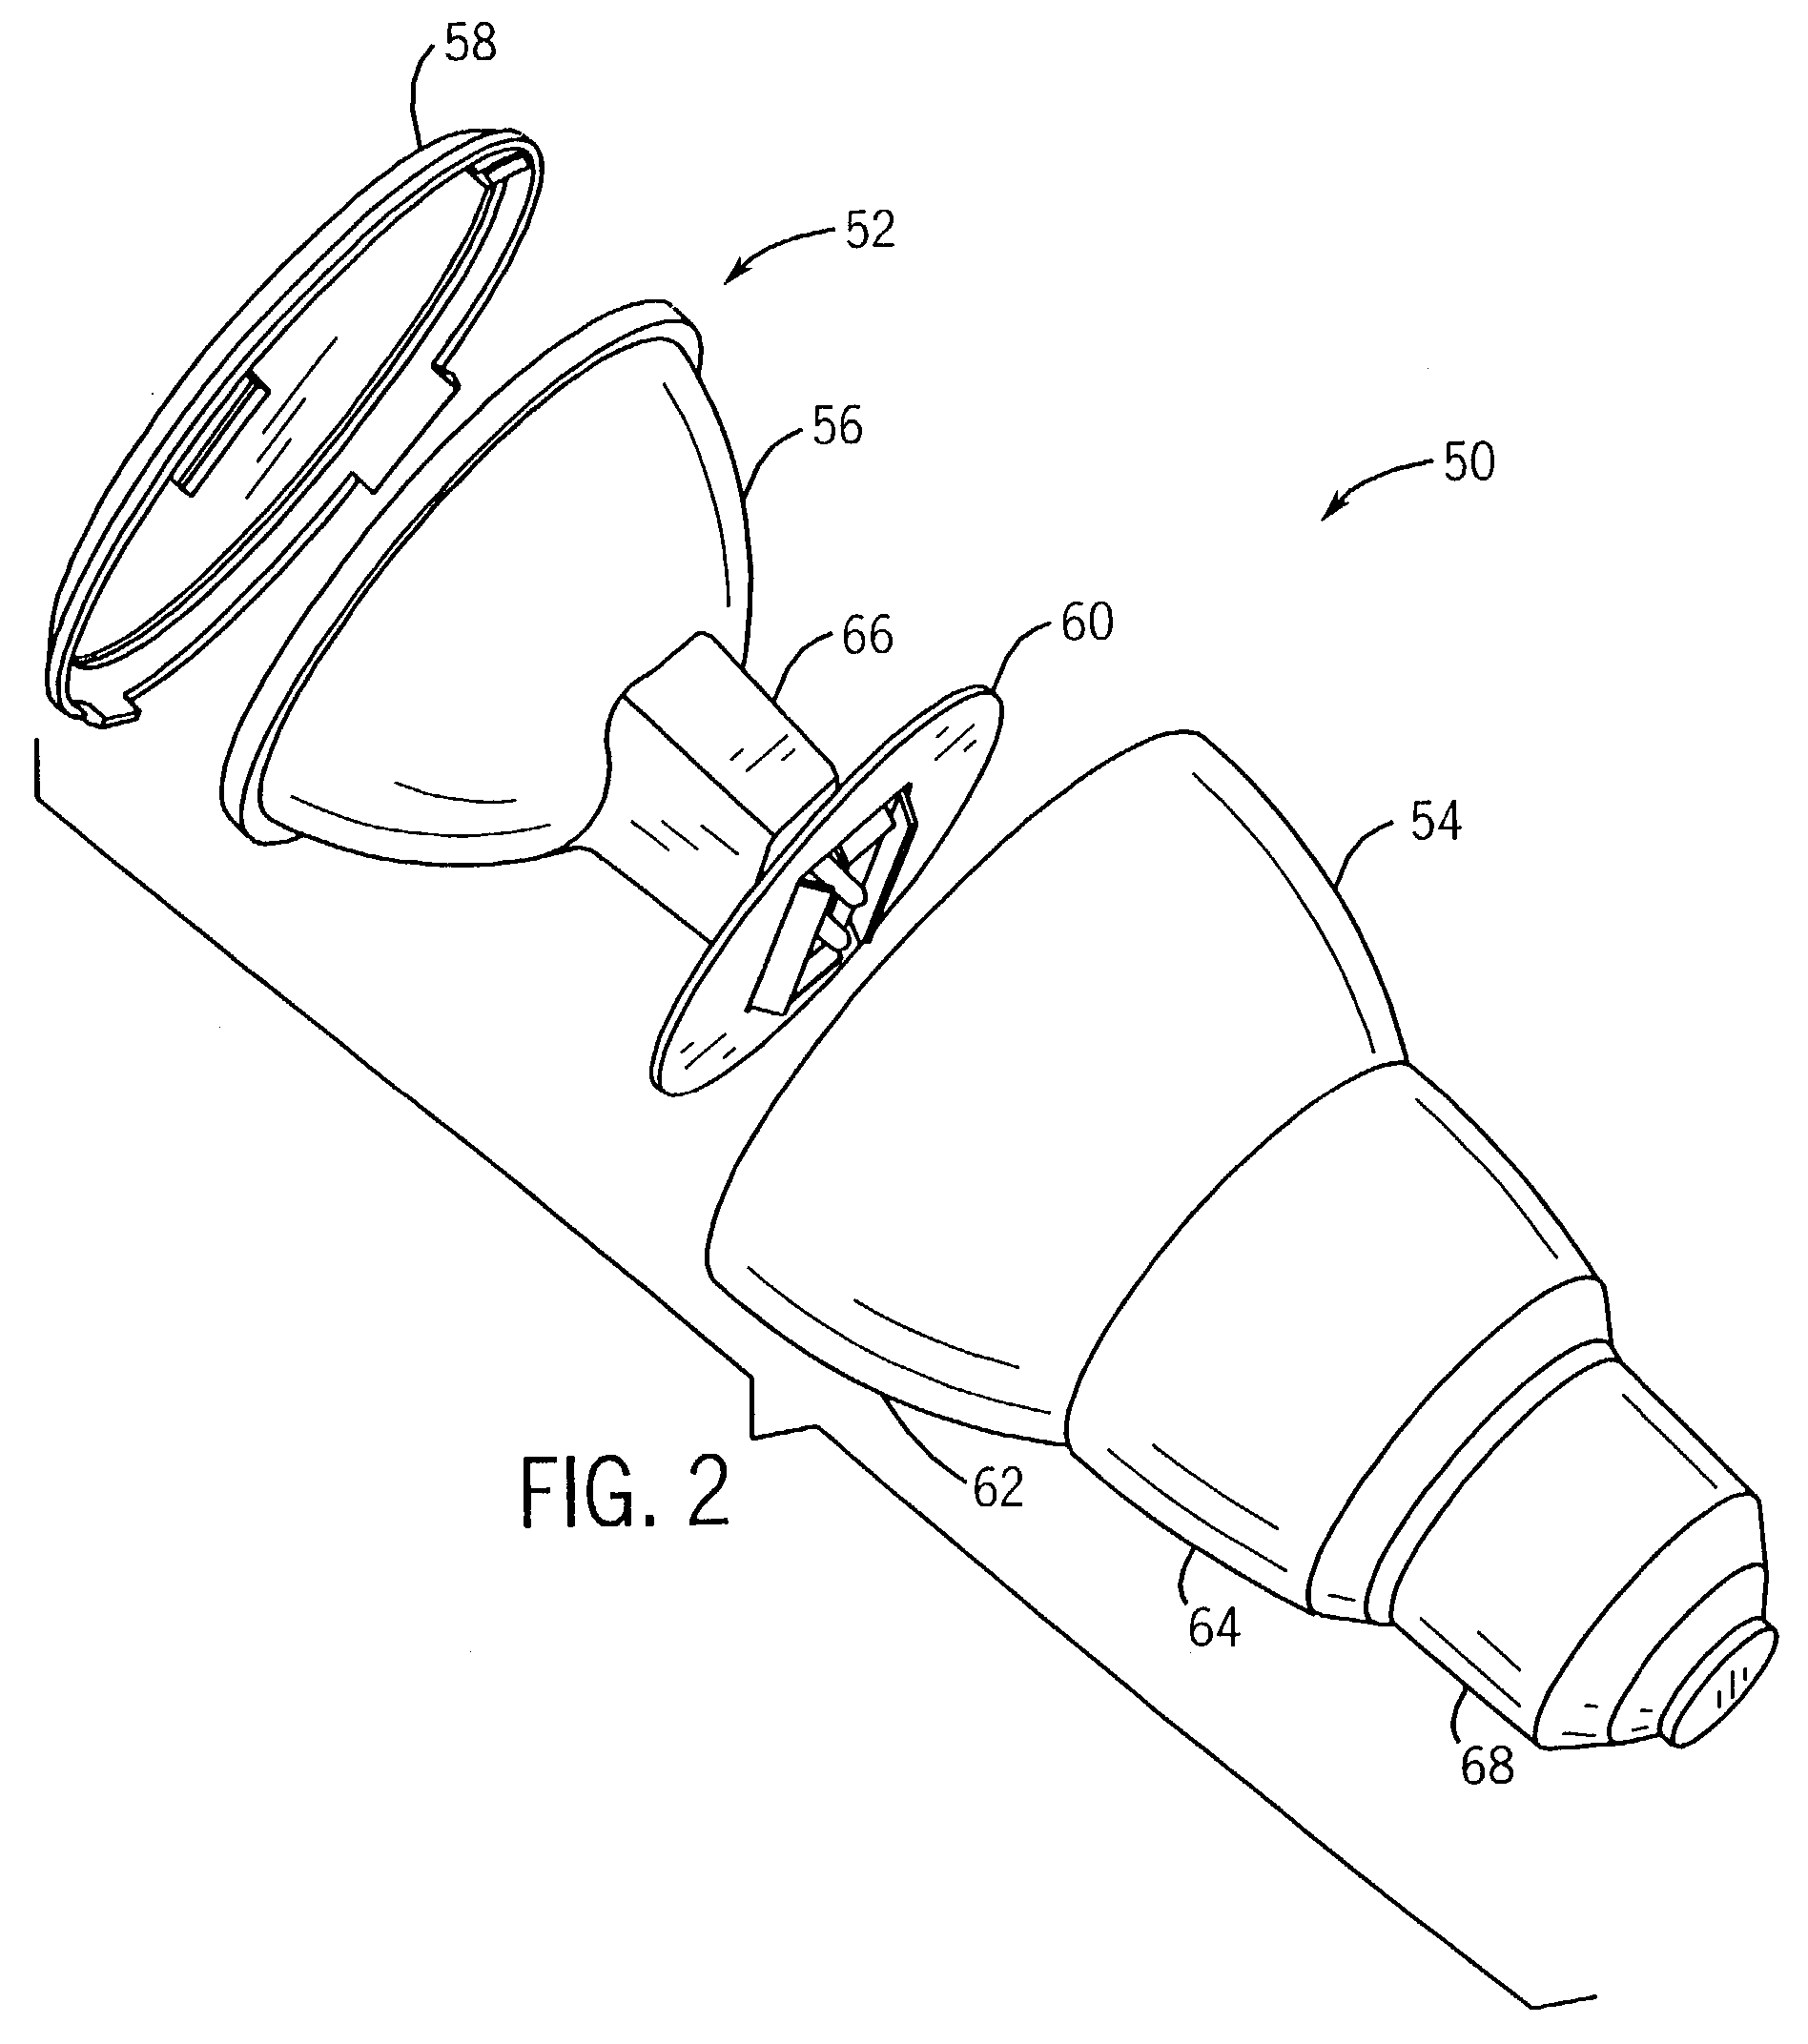 Integral ballast lamp thermal management method and apparatus